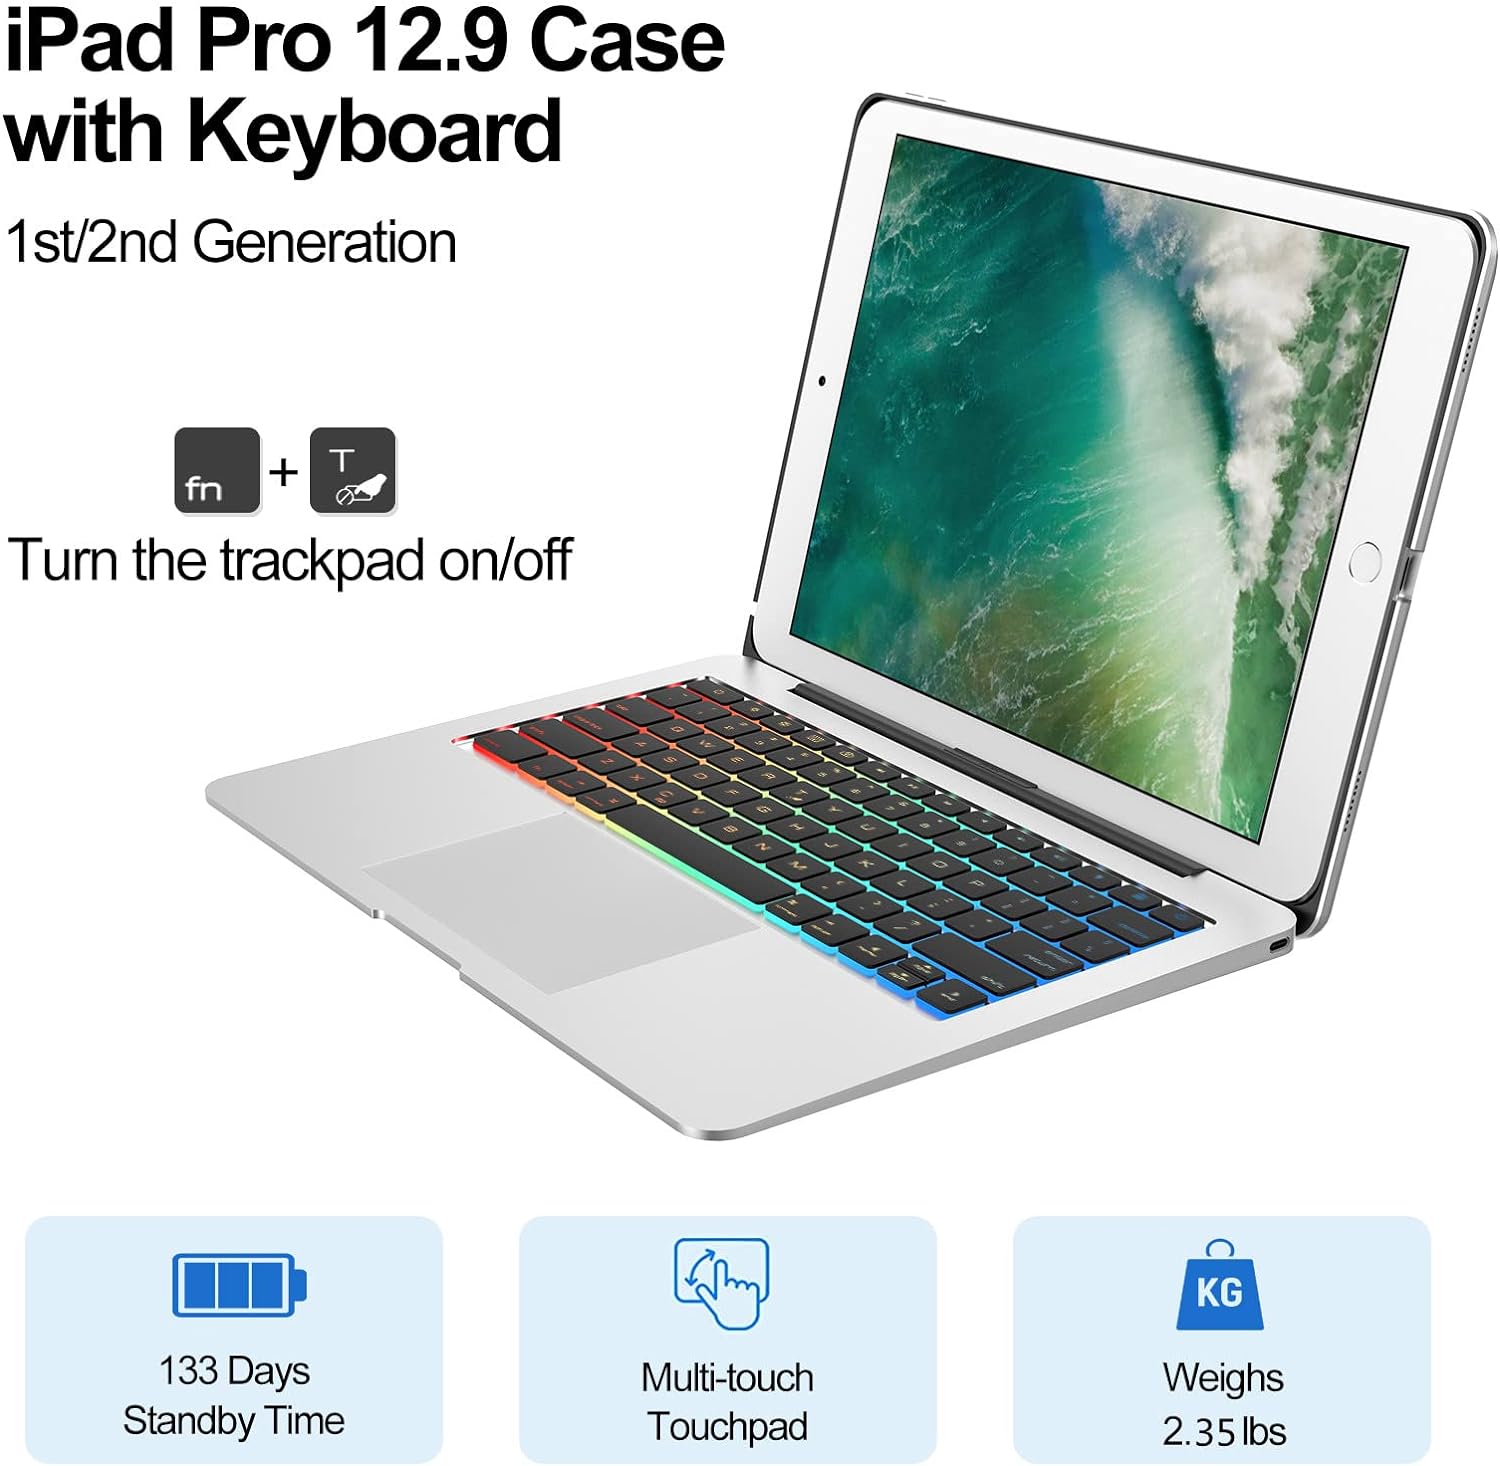 Upgraded | Touch Keyboard for iPad Pro 12.9 inch - 2017 (2nd Generation) - $105